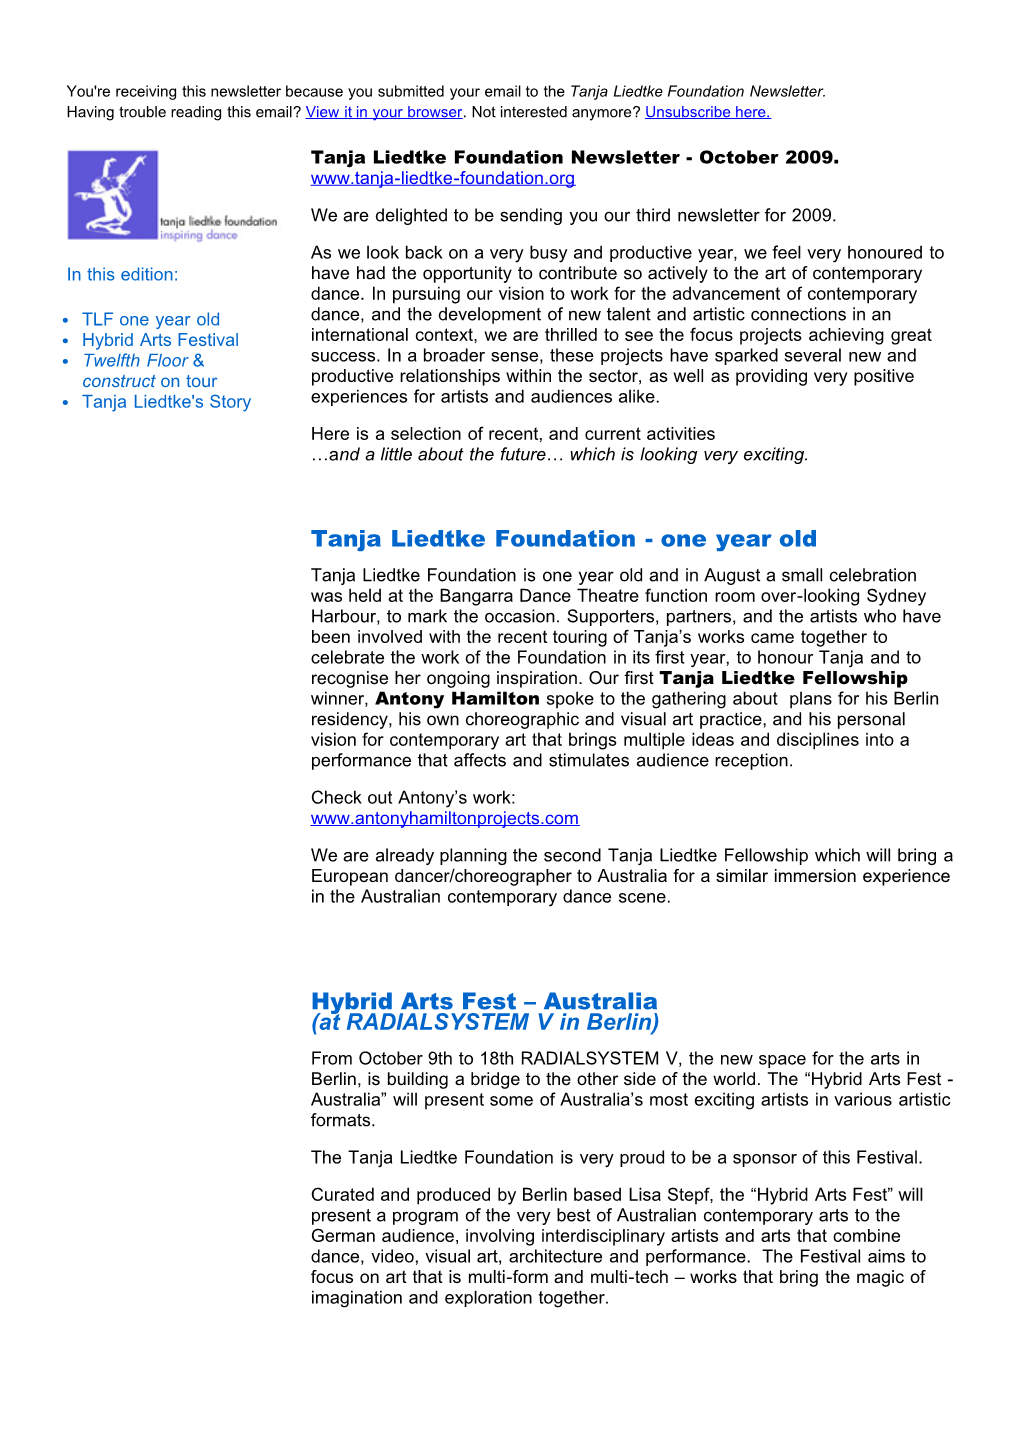 Newsletter Because You Submitted Your Email to the Tanja Liedtke Foundation Newsletter